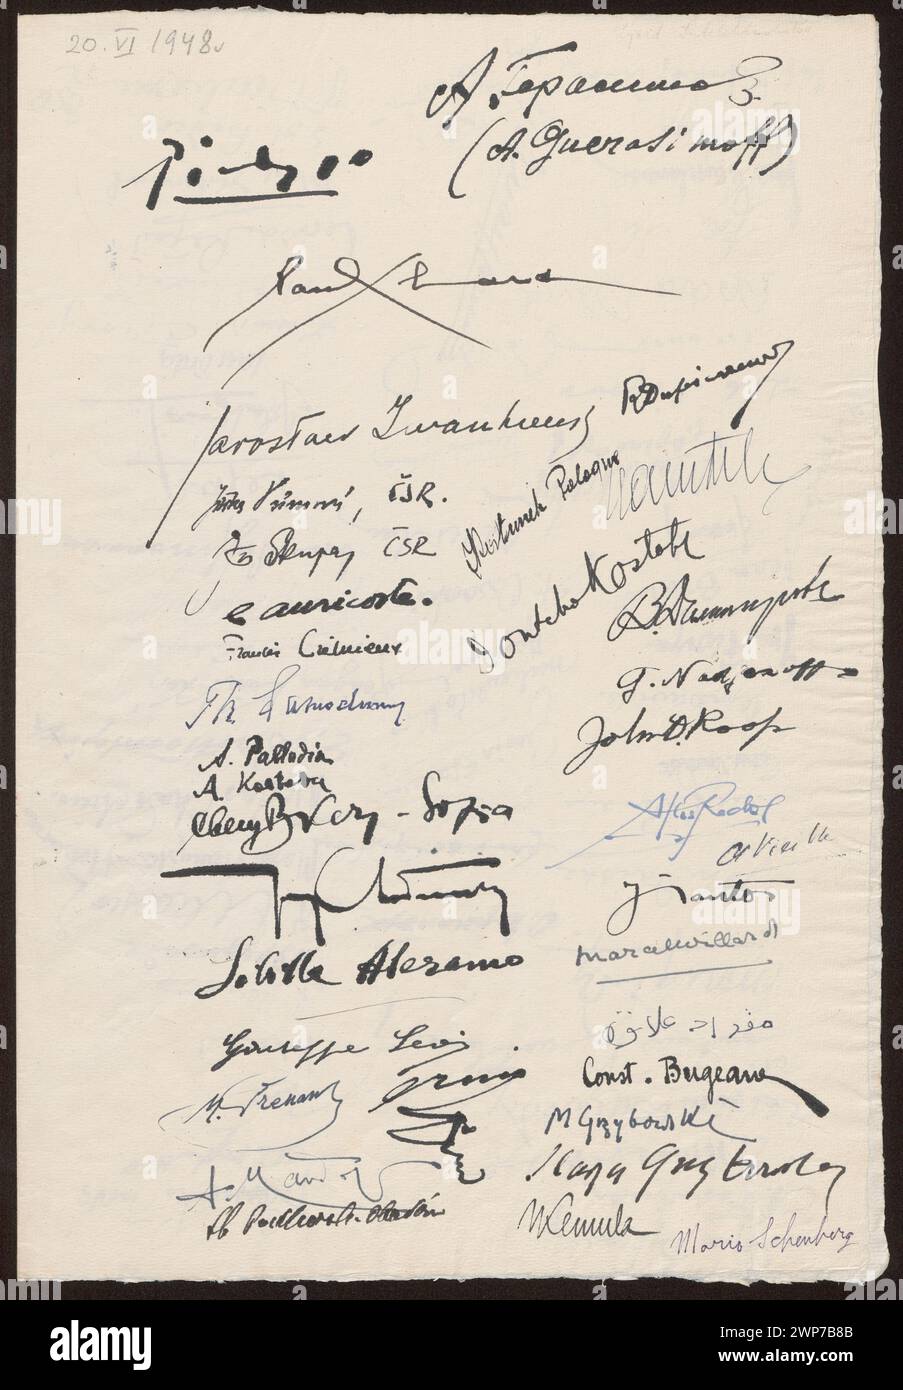 Card with the signatures of the participants of the World Congress of Intellectuals in defense of the peace in Wroclaw who came to the National Museum in Warsaw on August 29, 1948; National Museum in Warsaw (Warsaw; 1862-); 29.08.1948 (1948-00-00-1948-00-00);Bartłomiejczyk, Edmund (1885-1950), Dybowski, Stefan (1903-1970), Gerasimov, Alexander (1881-1963), Iwaszkiewicz, Jarosław (1894-1980), National Museum in Warsaw, Picasso, Pablo (1881-1973), Autographs, éluard, Paul (1895-1952), World Congress of Intellectuals in defense of the Peace (Wrocław - 1948) Stock Photo